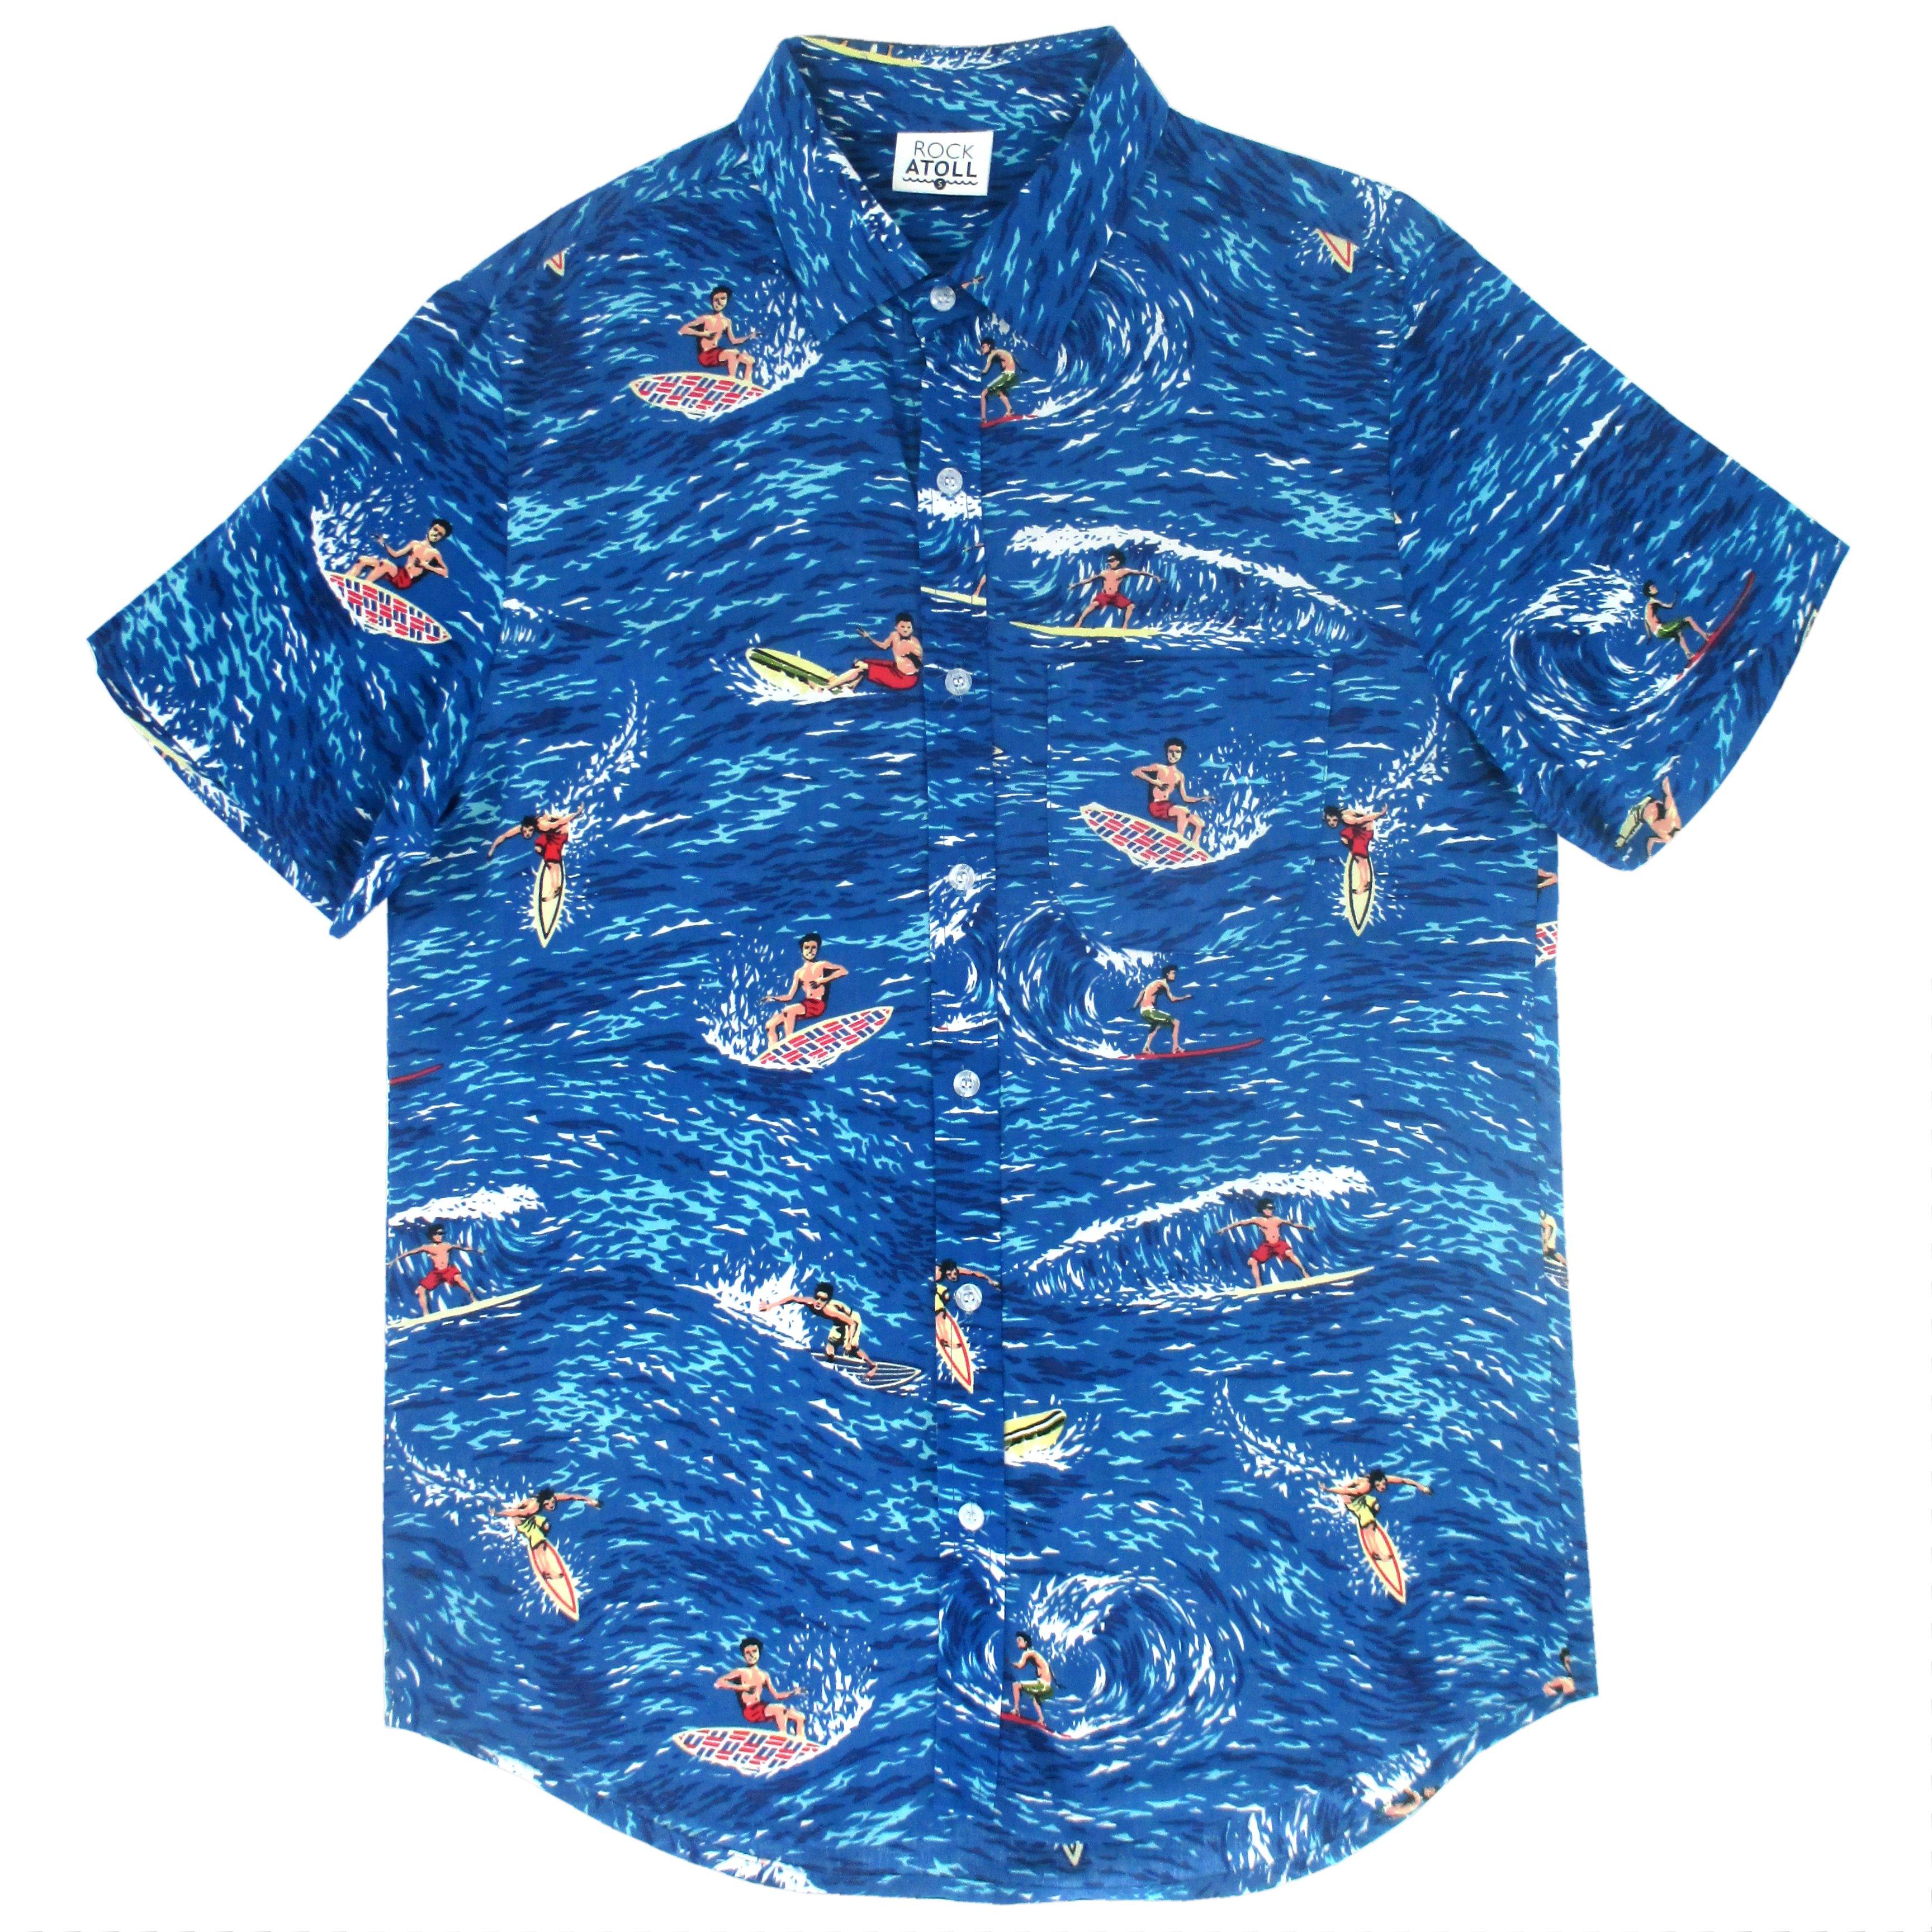 Surfer Patterned Cotton Summer Short Sleeve Button Up Shirts